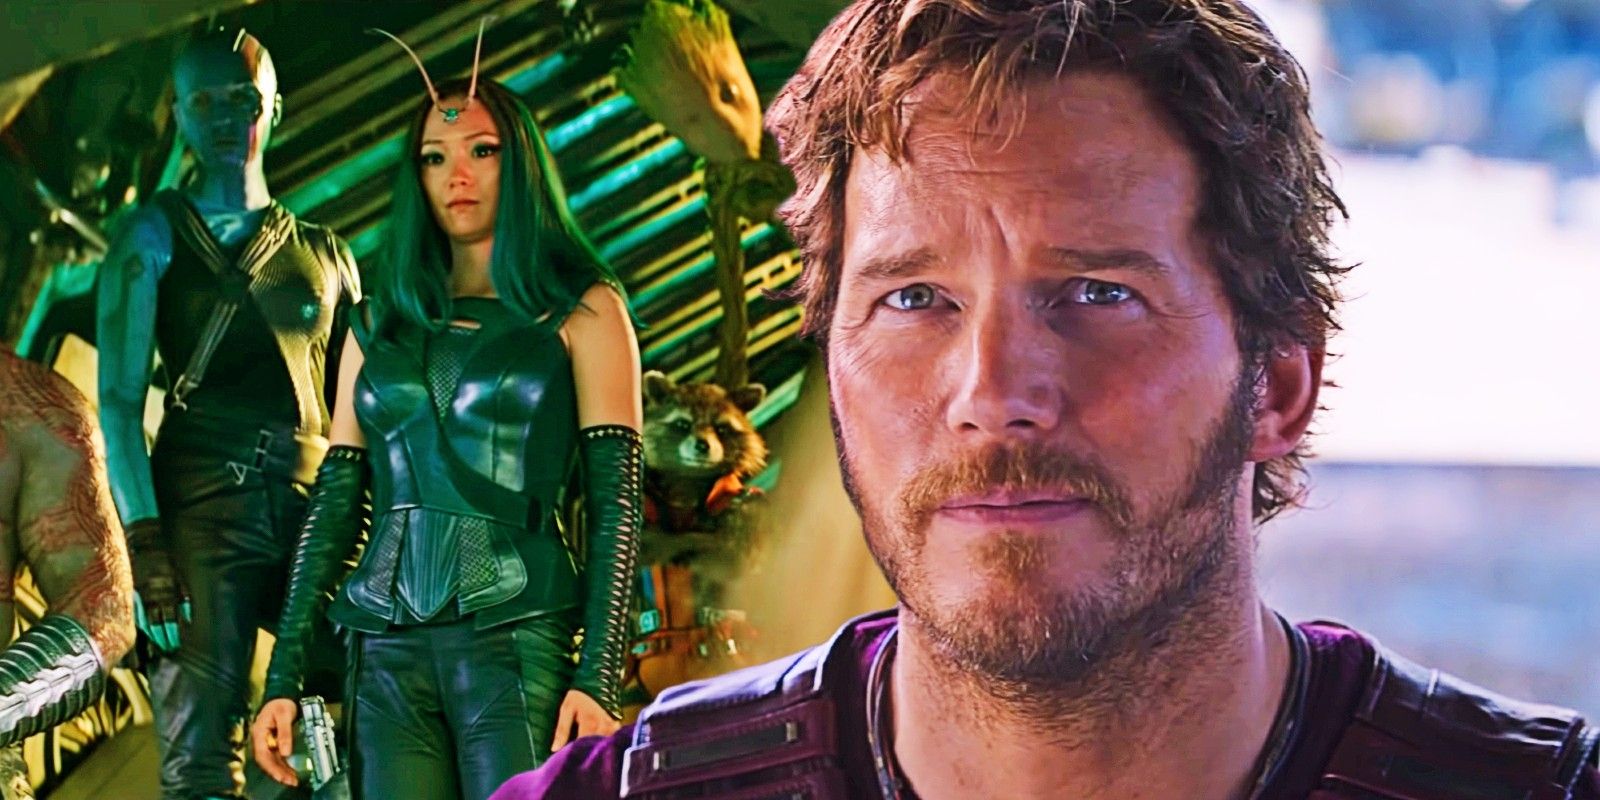 Chris Pratt as Star-Lord with Guardians of the Galaxy in Thor Love and Thunder